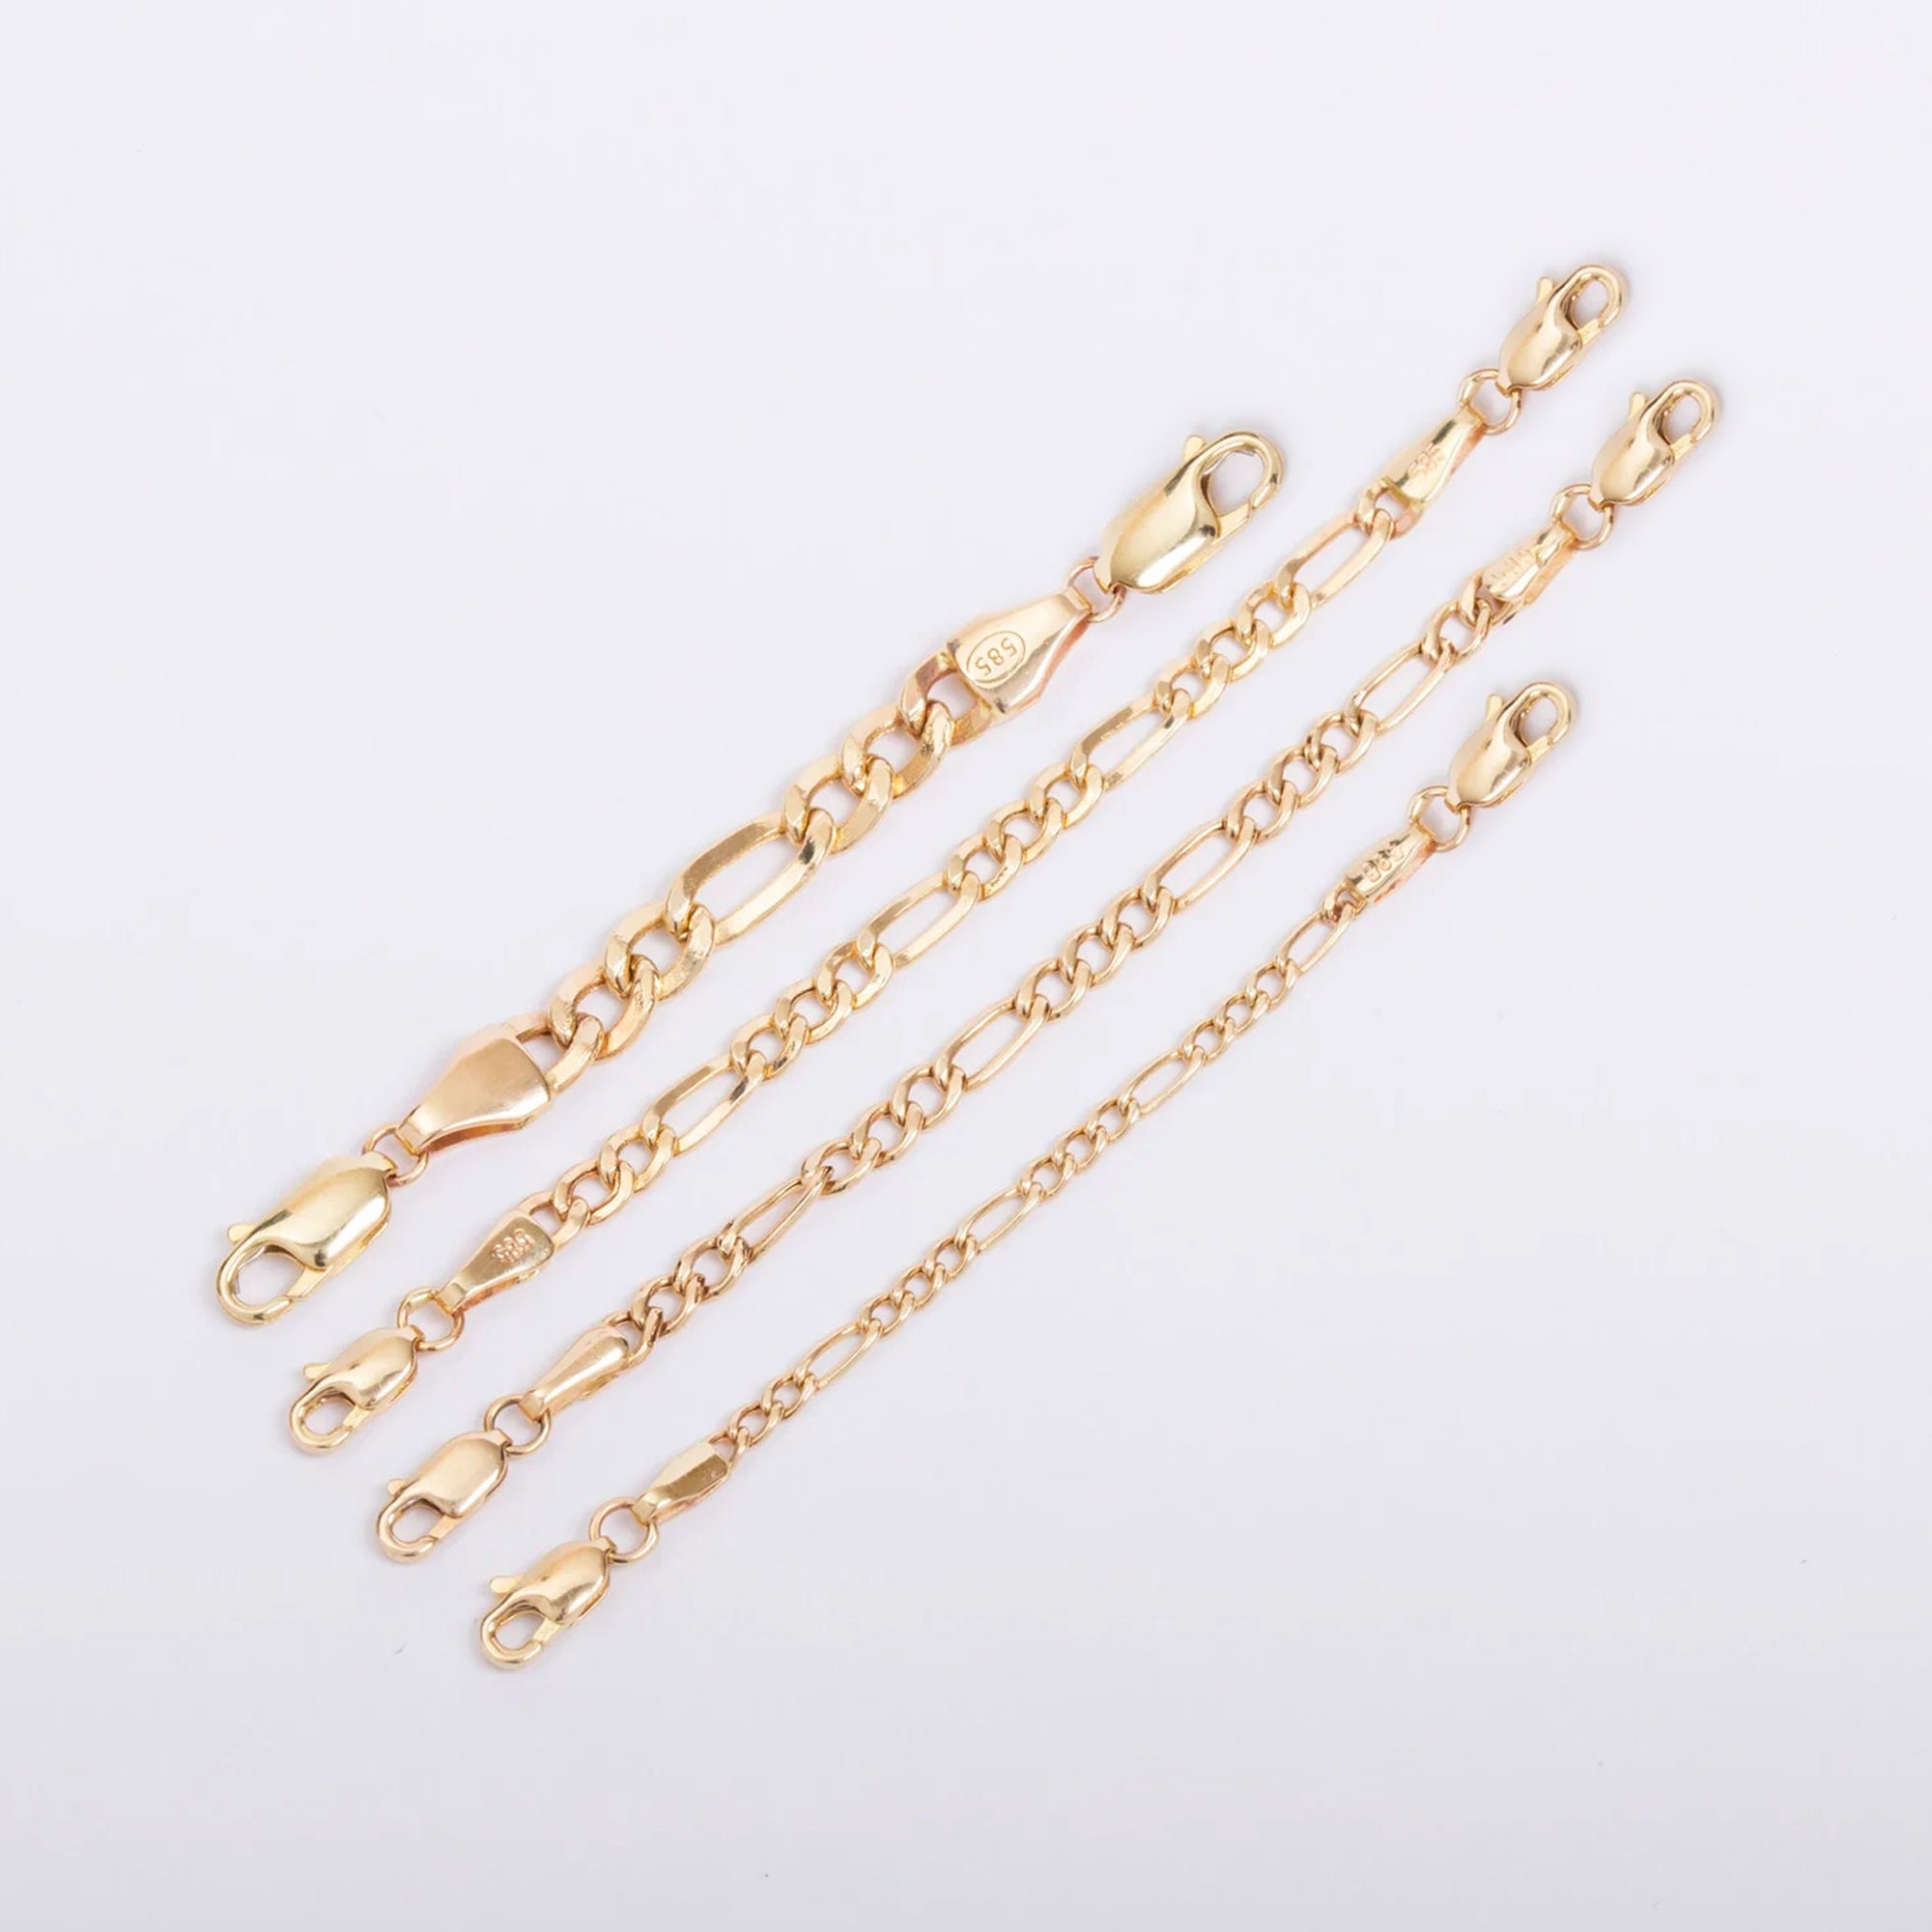 Extension chain · chain extender · chain extend · 24k gold plated brass ·  adjustable chain · extra chain